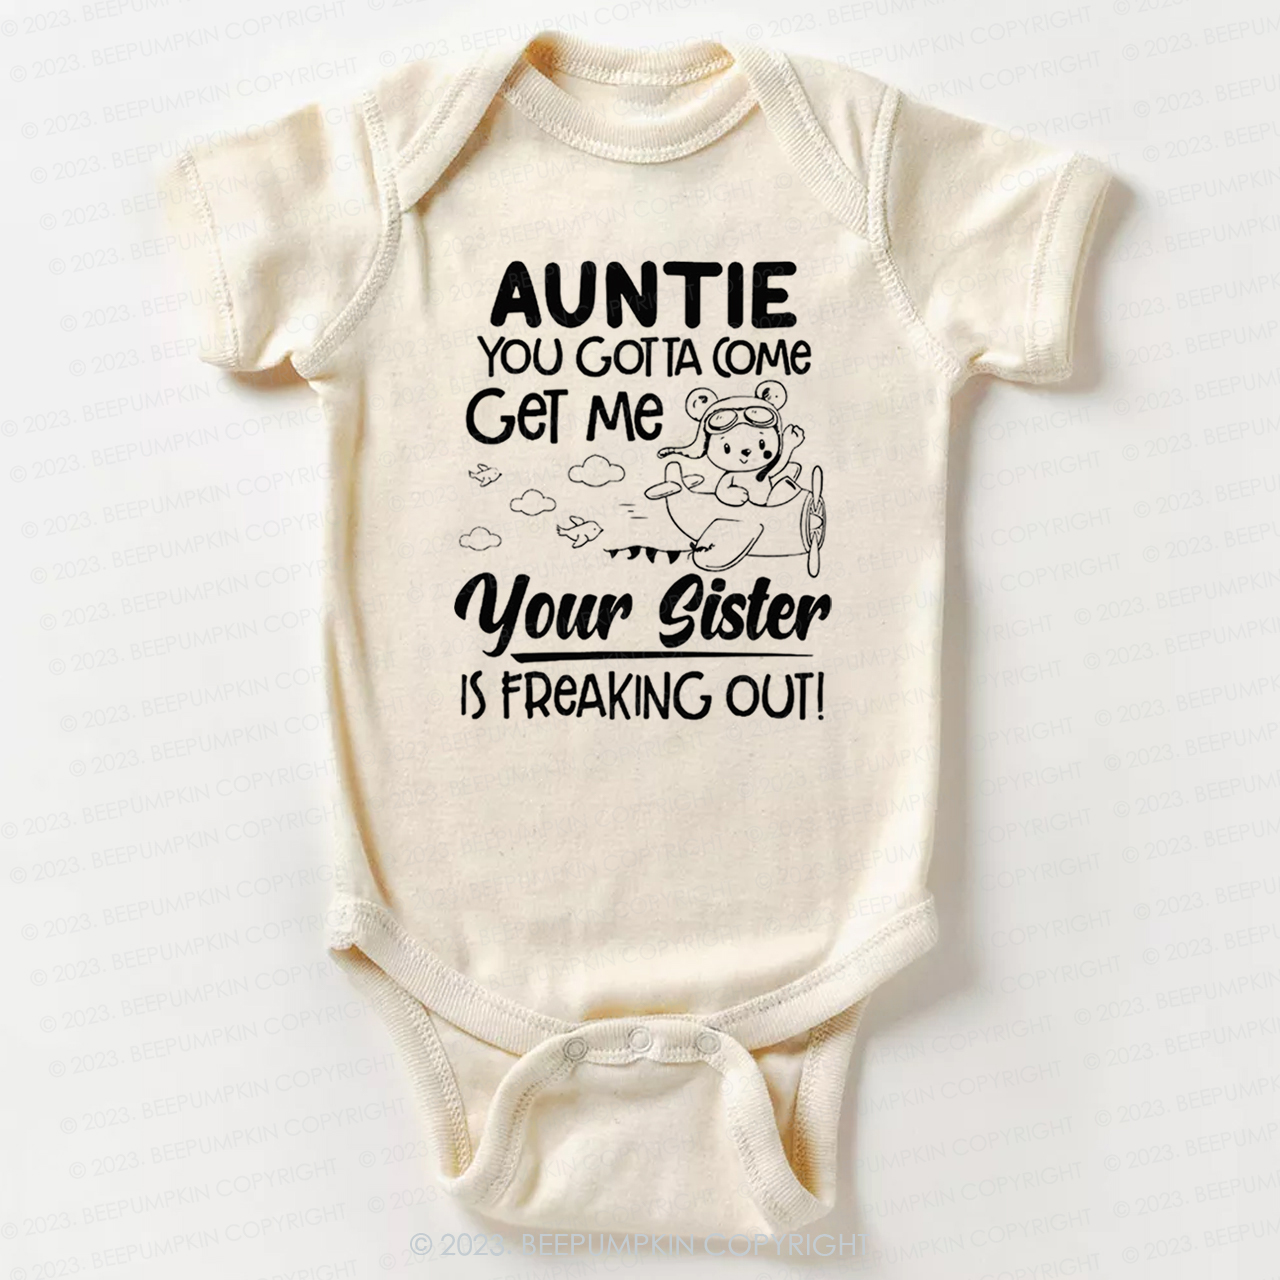 Auntie You Gotta Come Get Me Your Sister Is Freaking Out Bodysuit For Baby